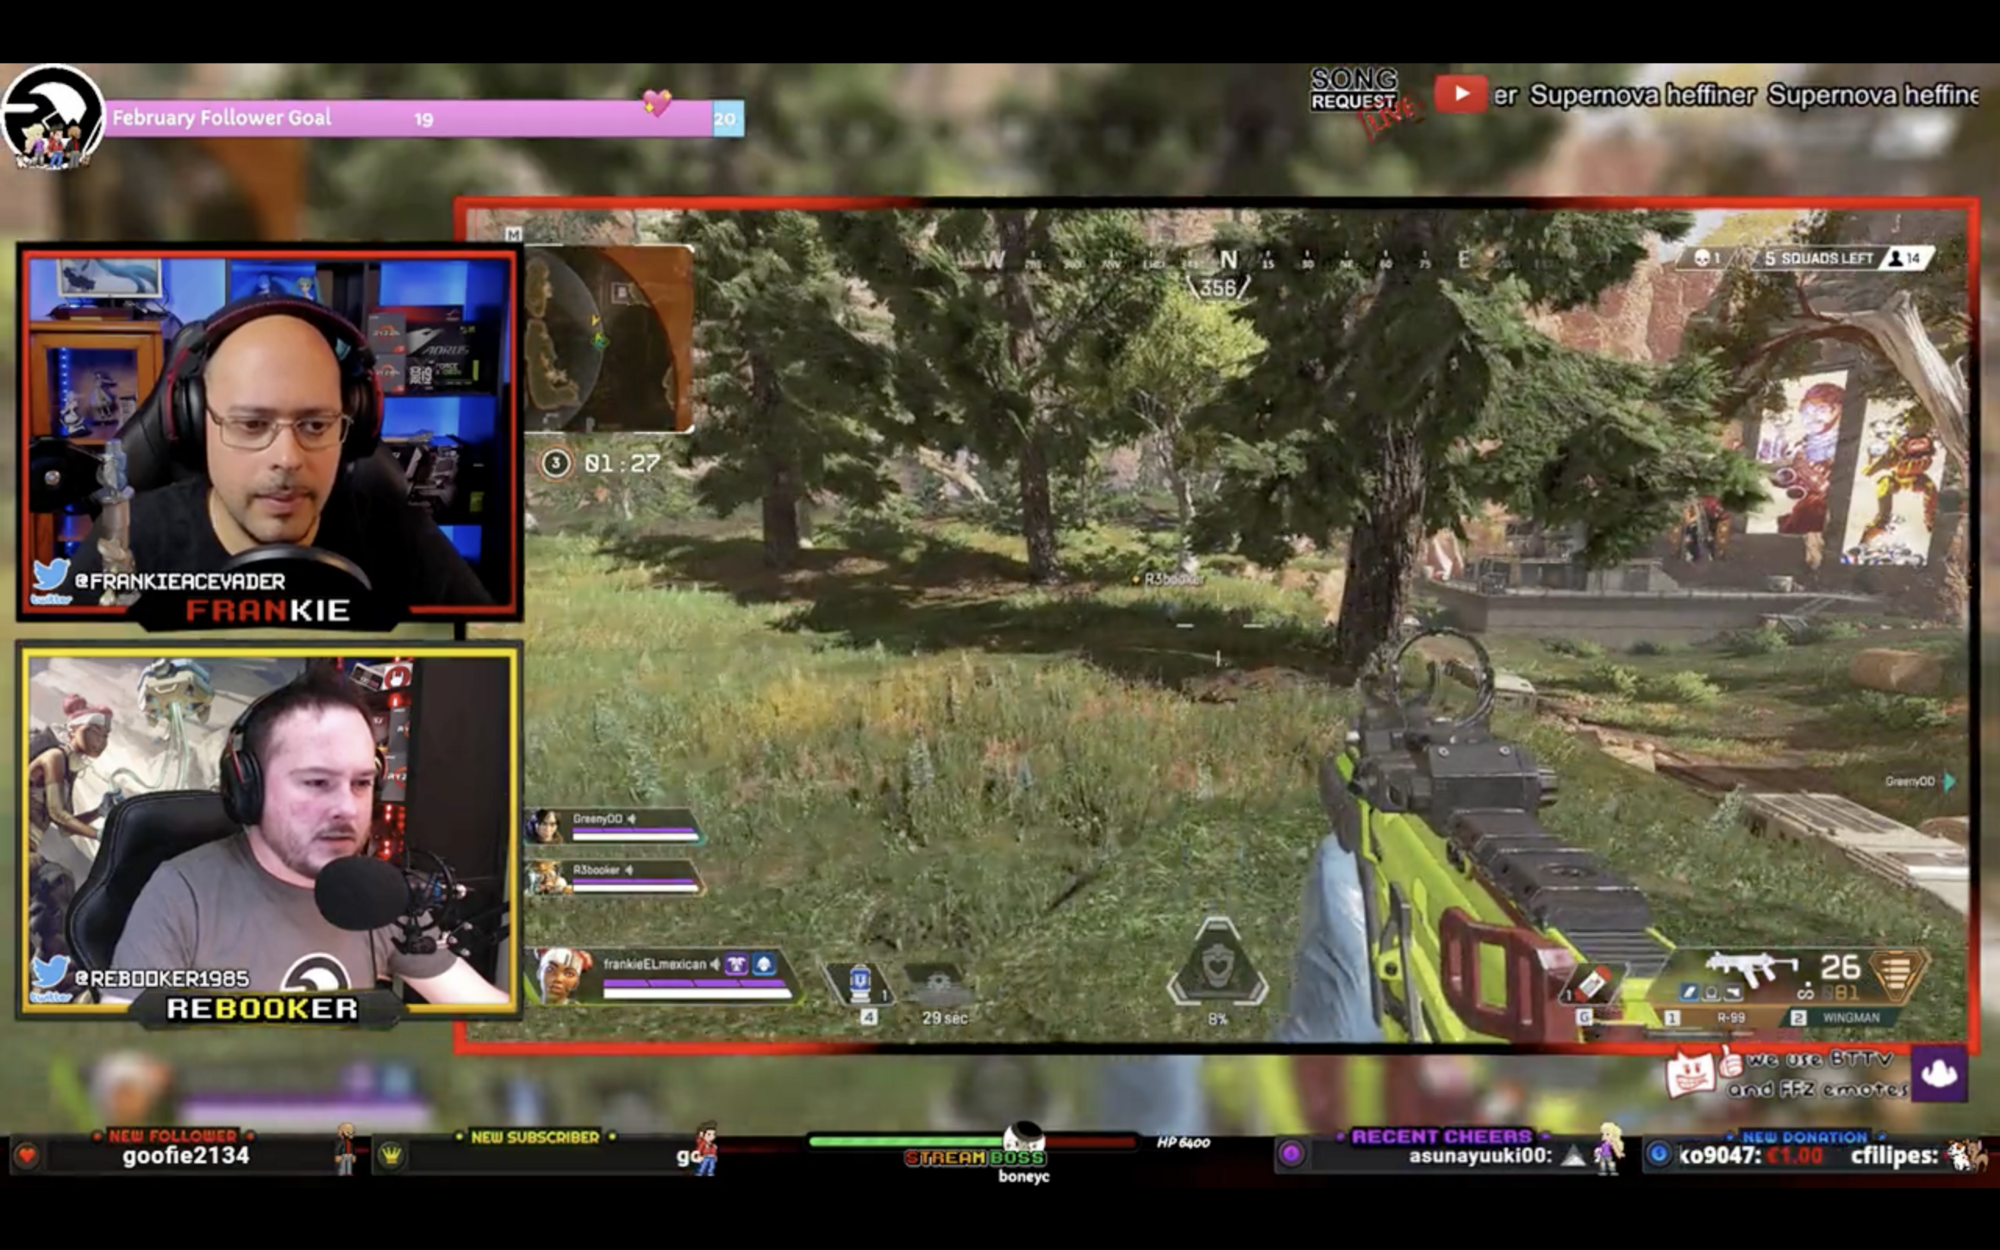 Video Transport helps teams create better streams on Twitch